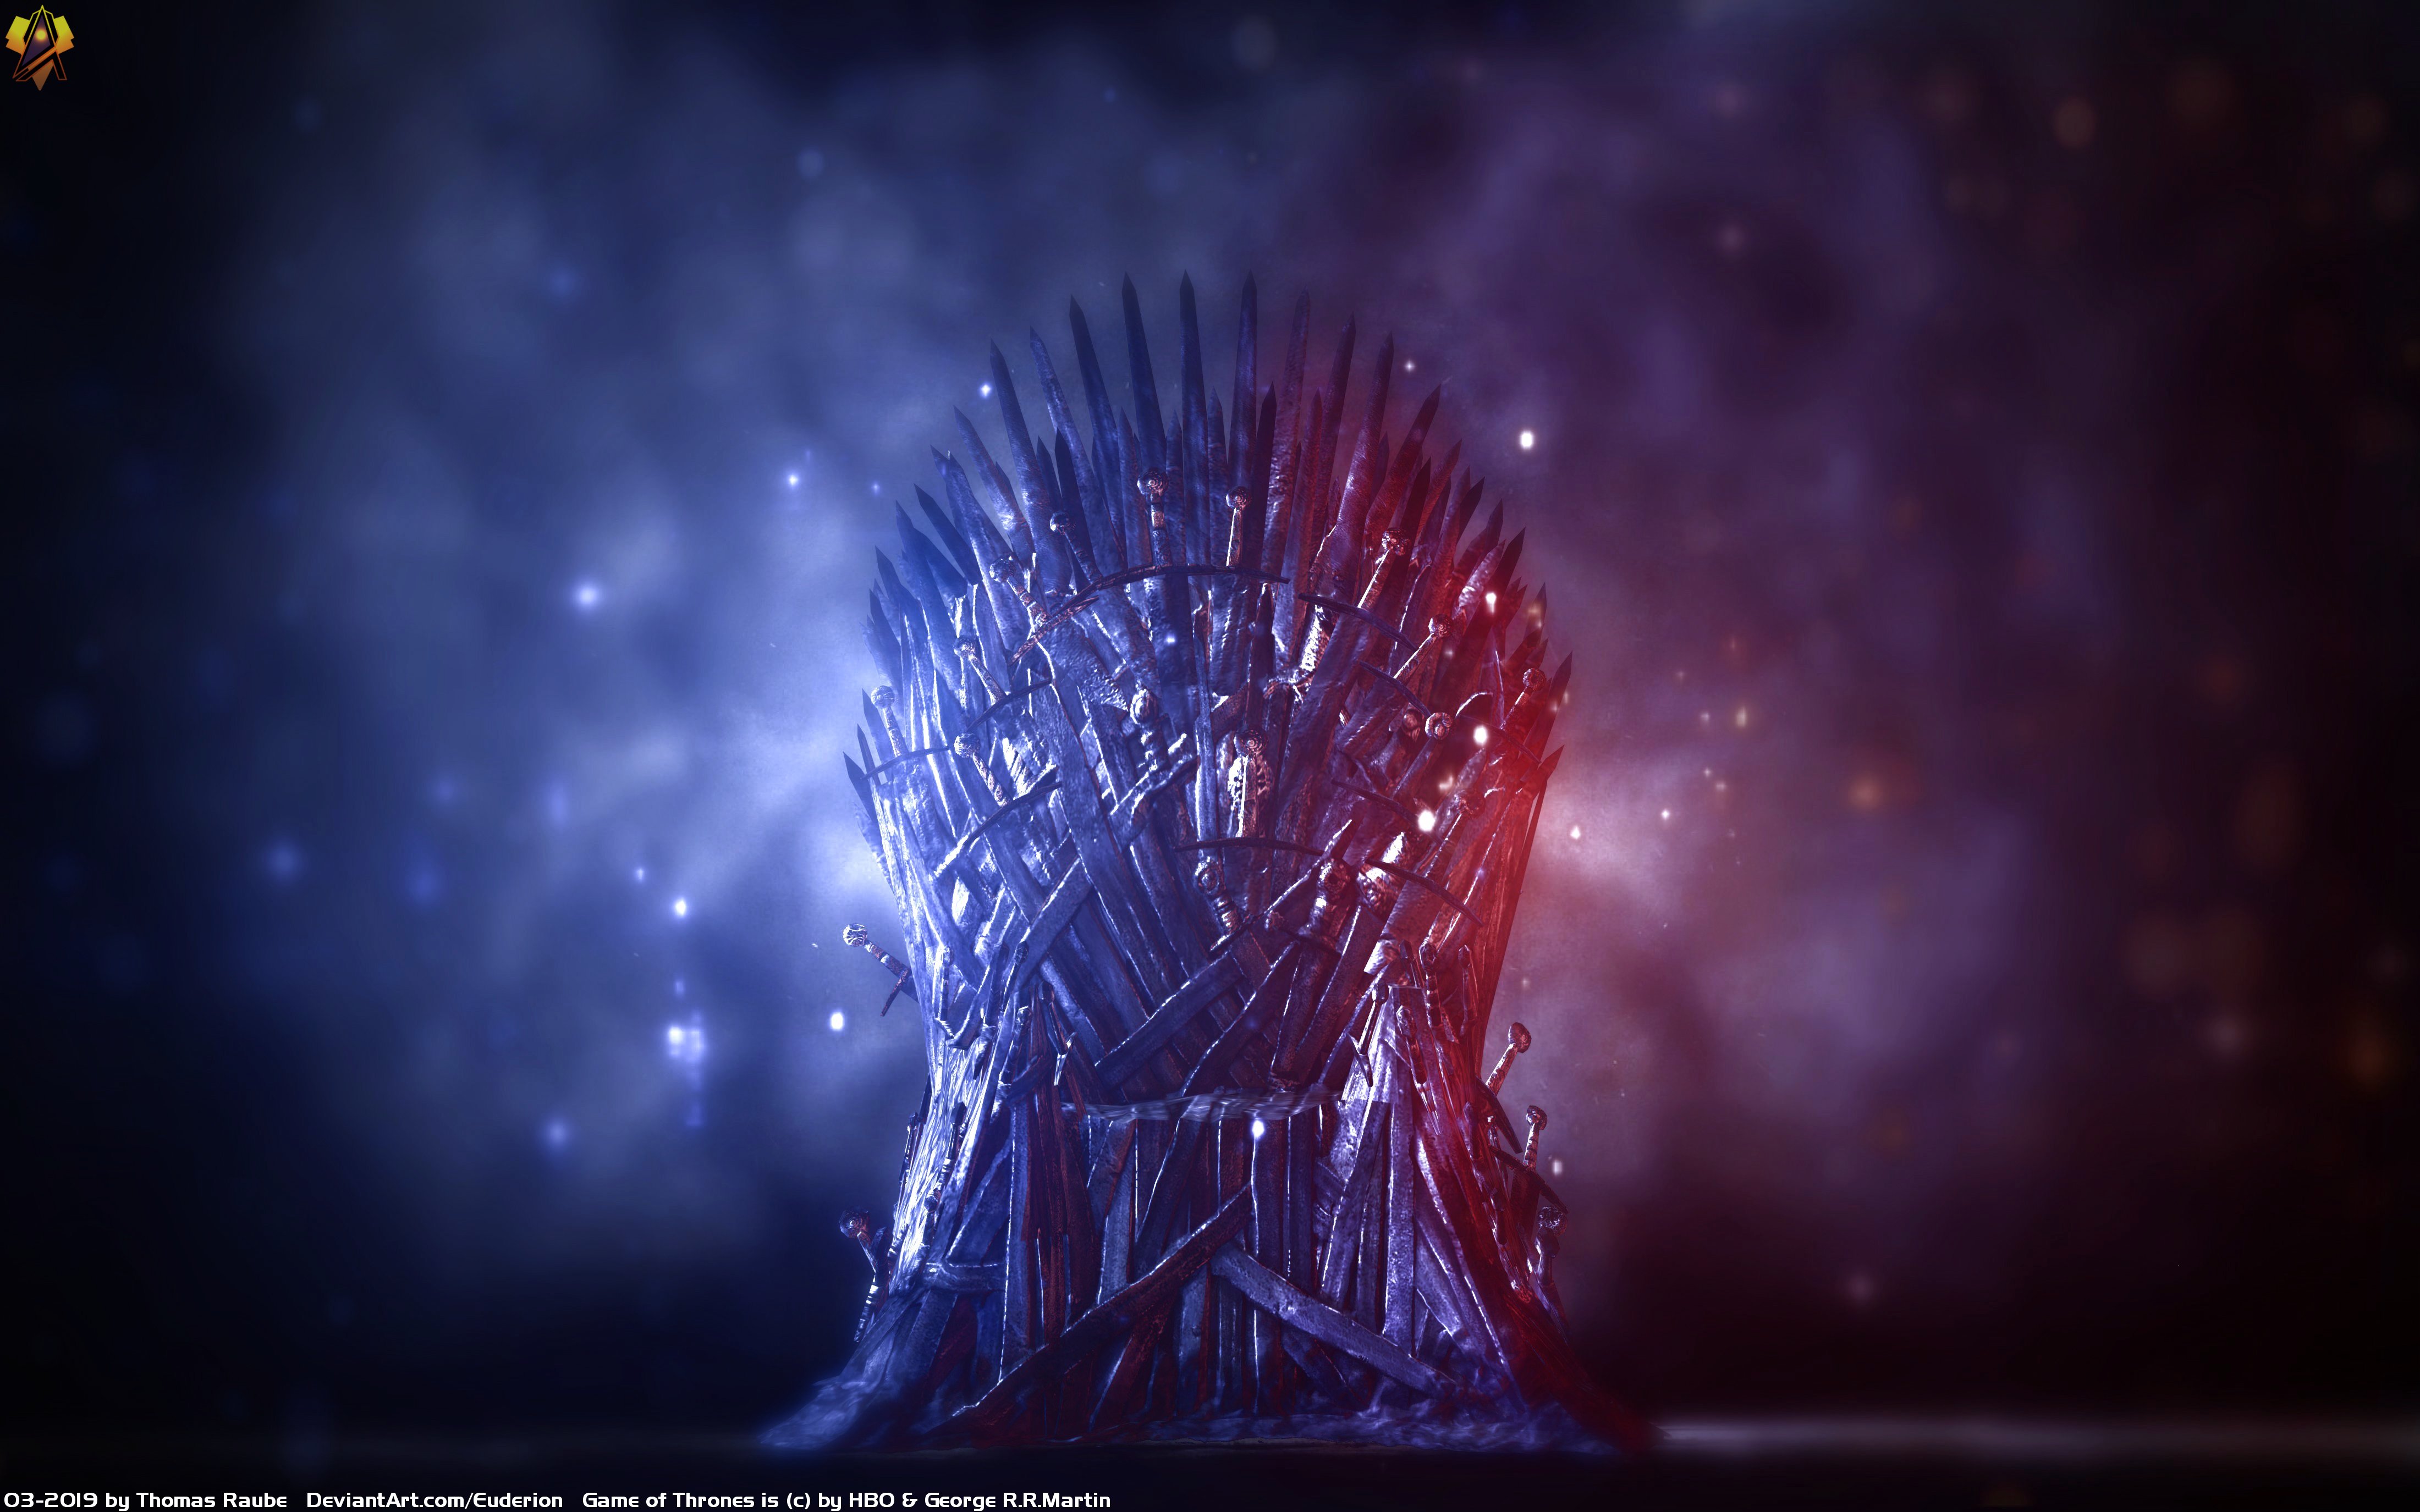 A Song Of Ice And Fire Game Of Thrones Iron Throne Throne 4400x2750